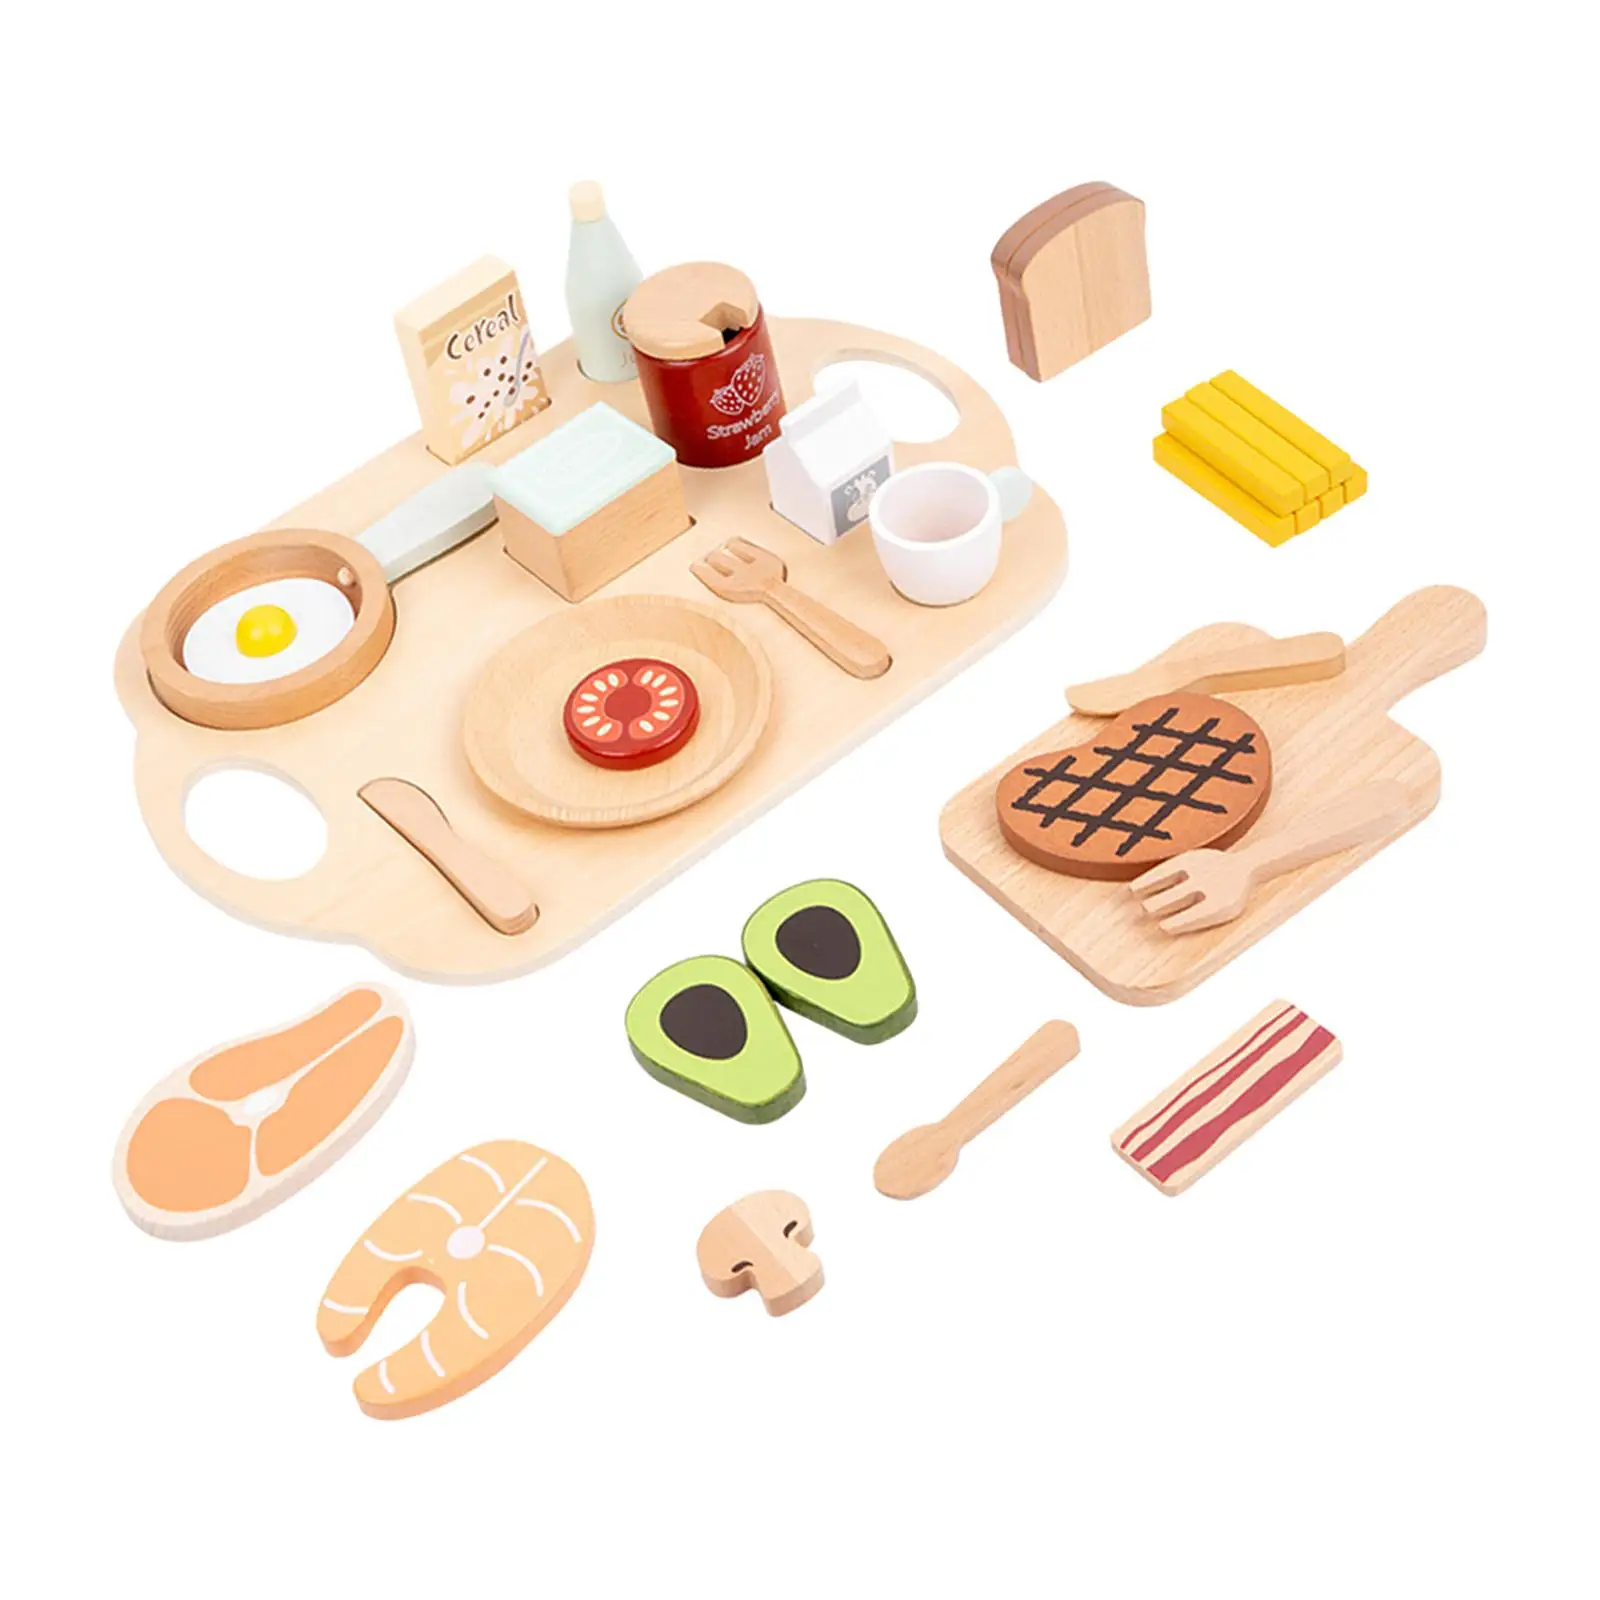 Wooden Pretend Play Sets Educational Wooden Play Set Gift Party Favors